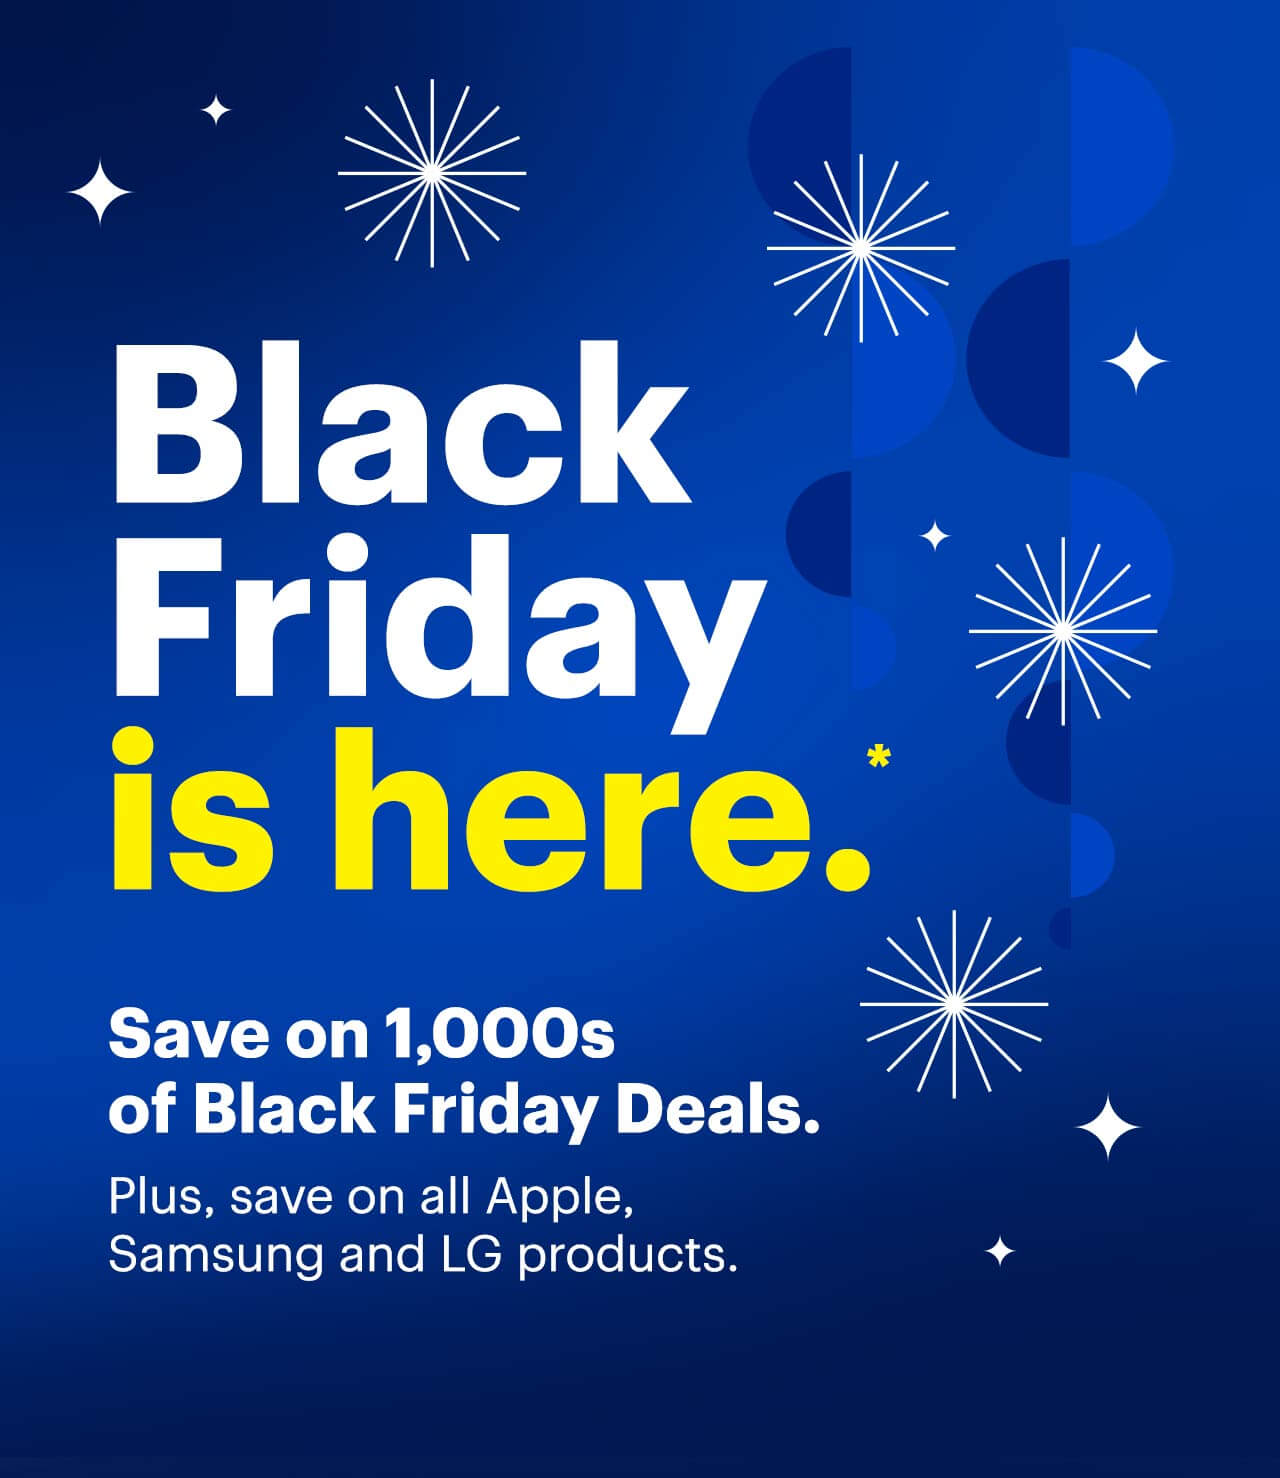 Black Friday is here. Save on thousands of Black Friday Deals. Plus, save on all Apple, Samsung and LG products. Reference disclaimer.